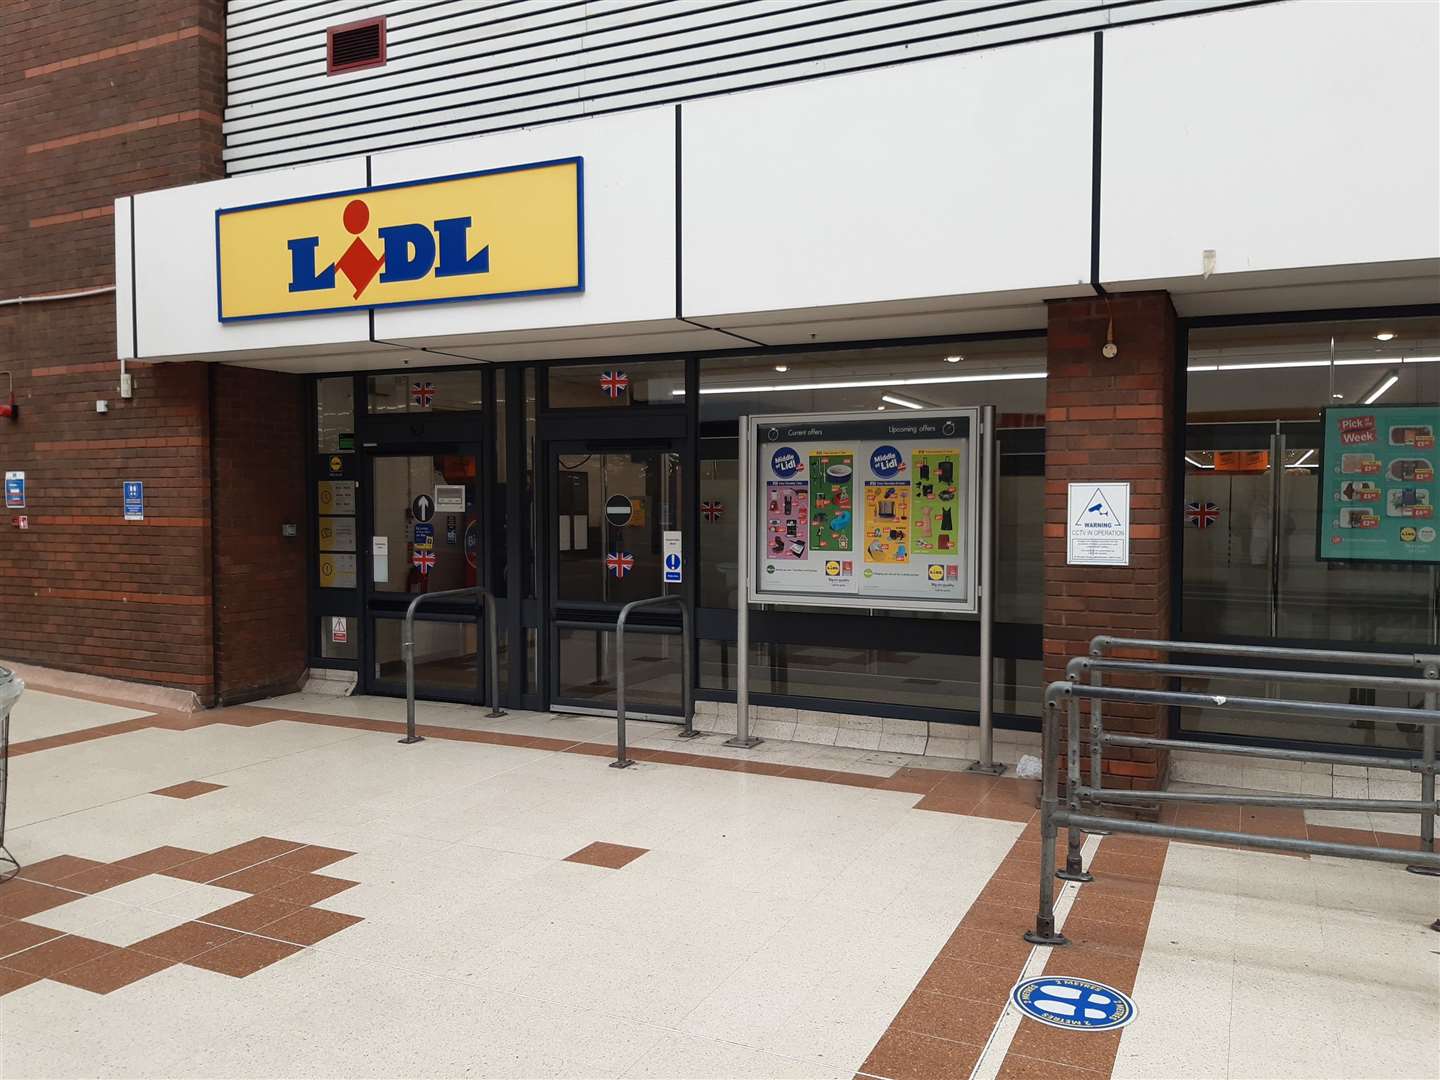 The Lidl store in the Broadway Shopping Centre, Maidstone